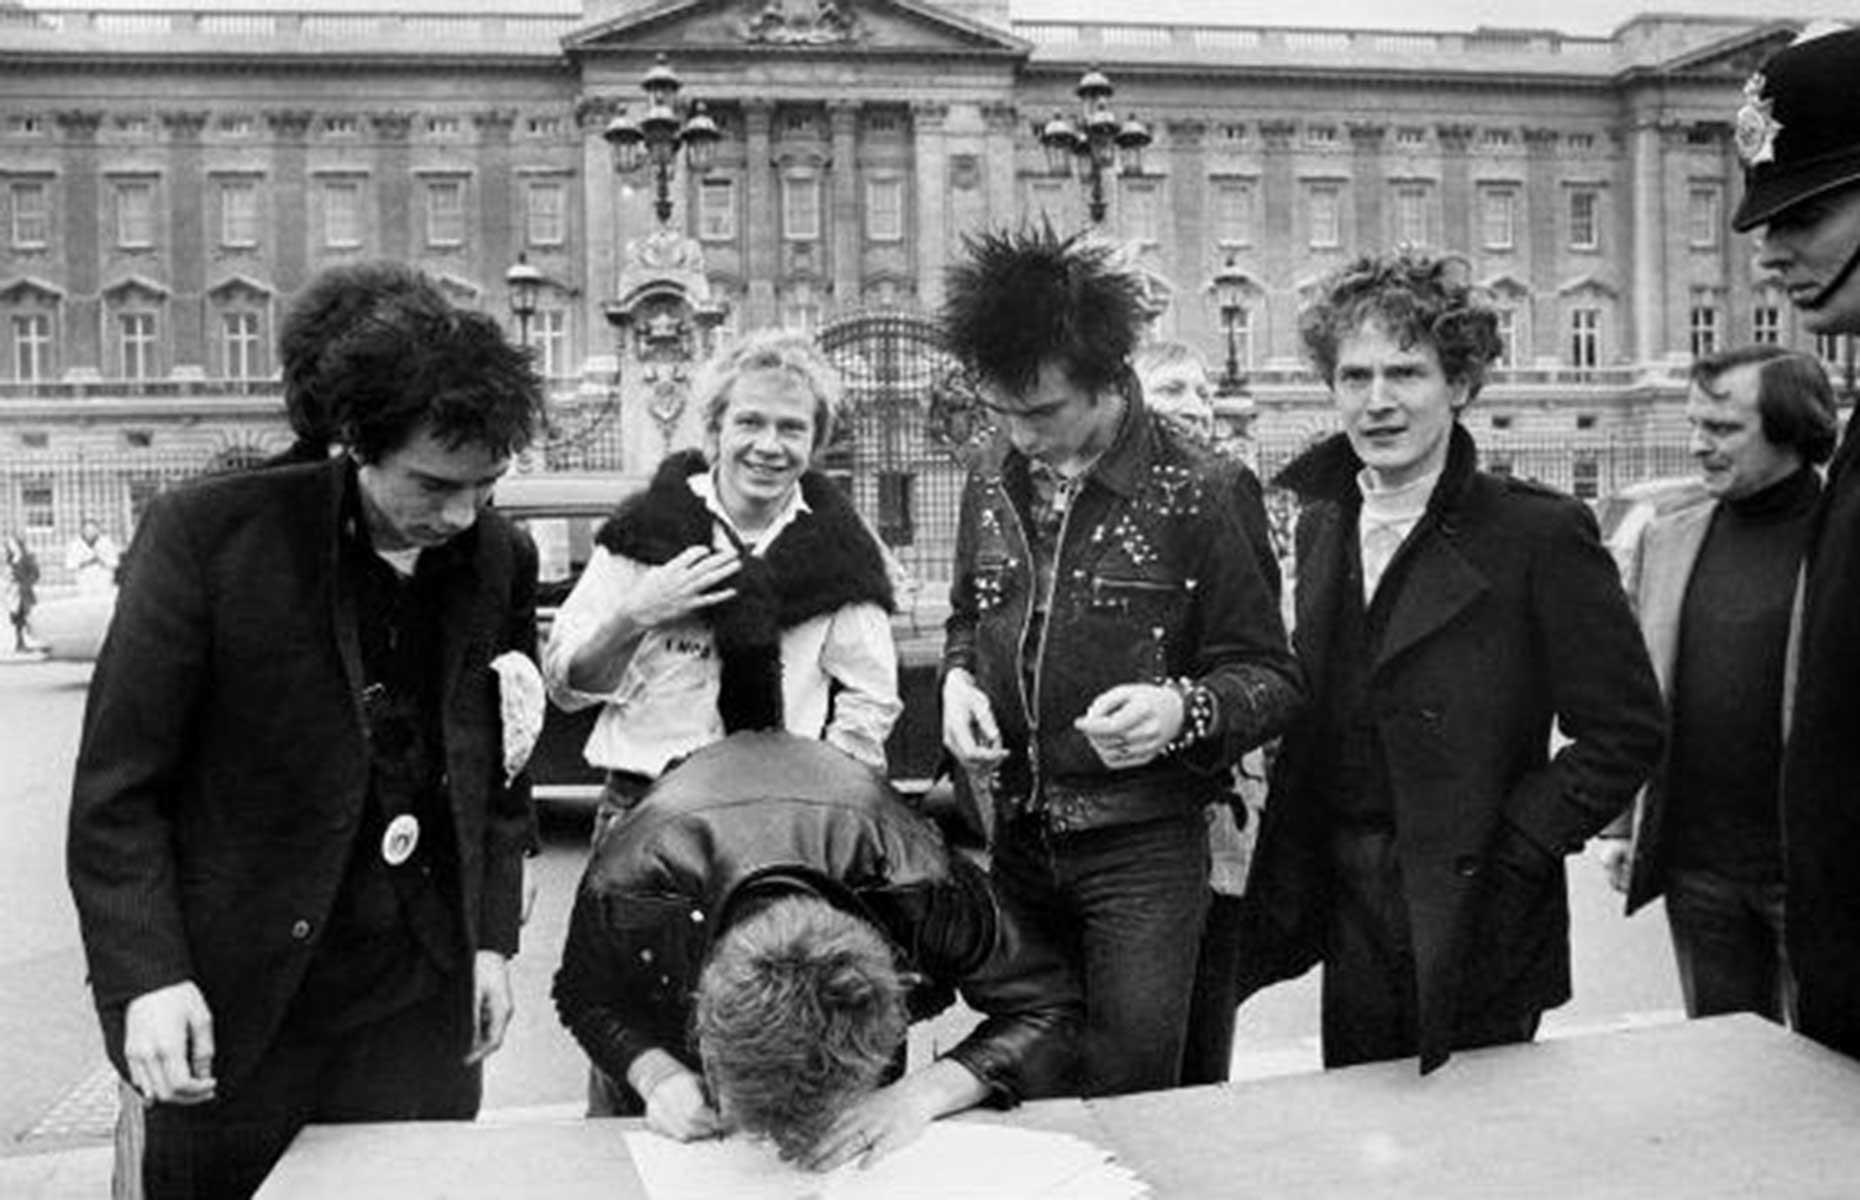 Sex Pistols – God Save the Queen/No Feelings 